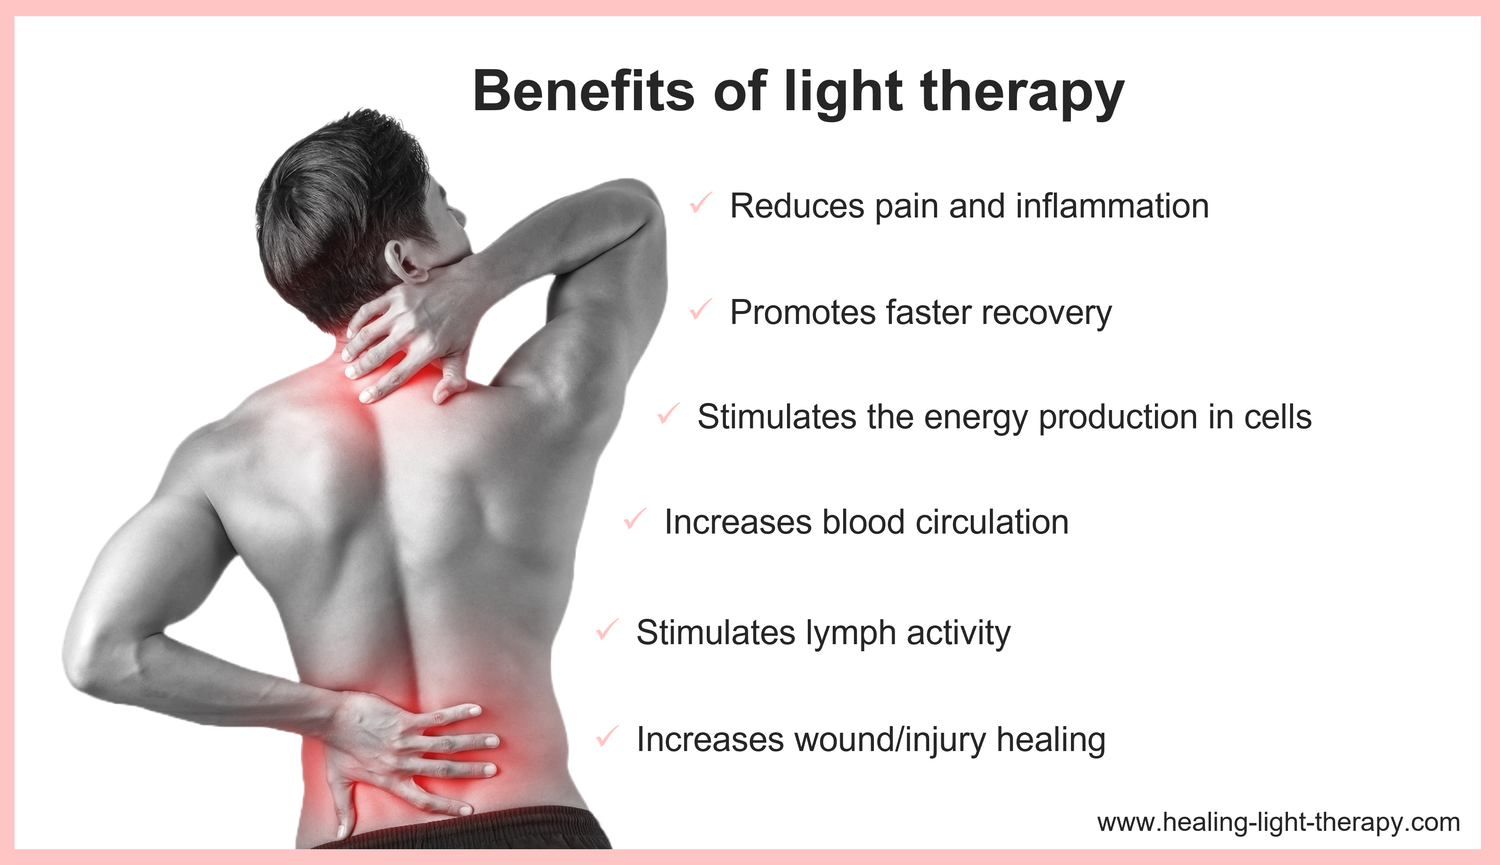 Benefits of light therapy